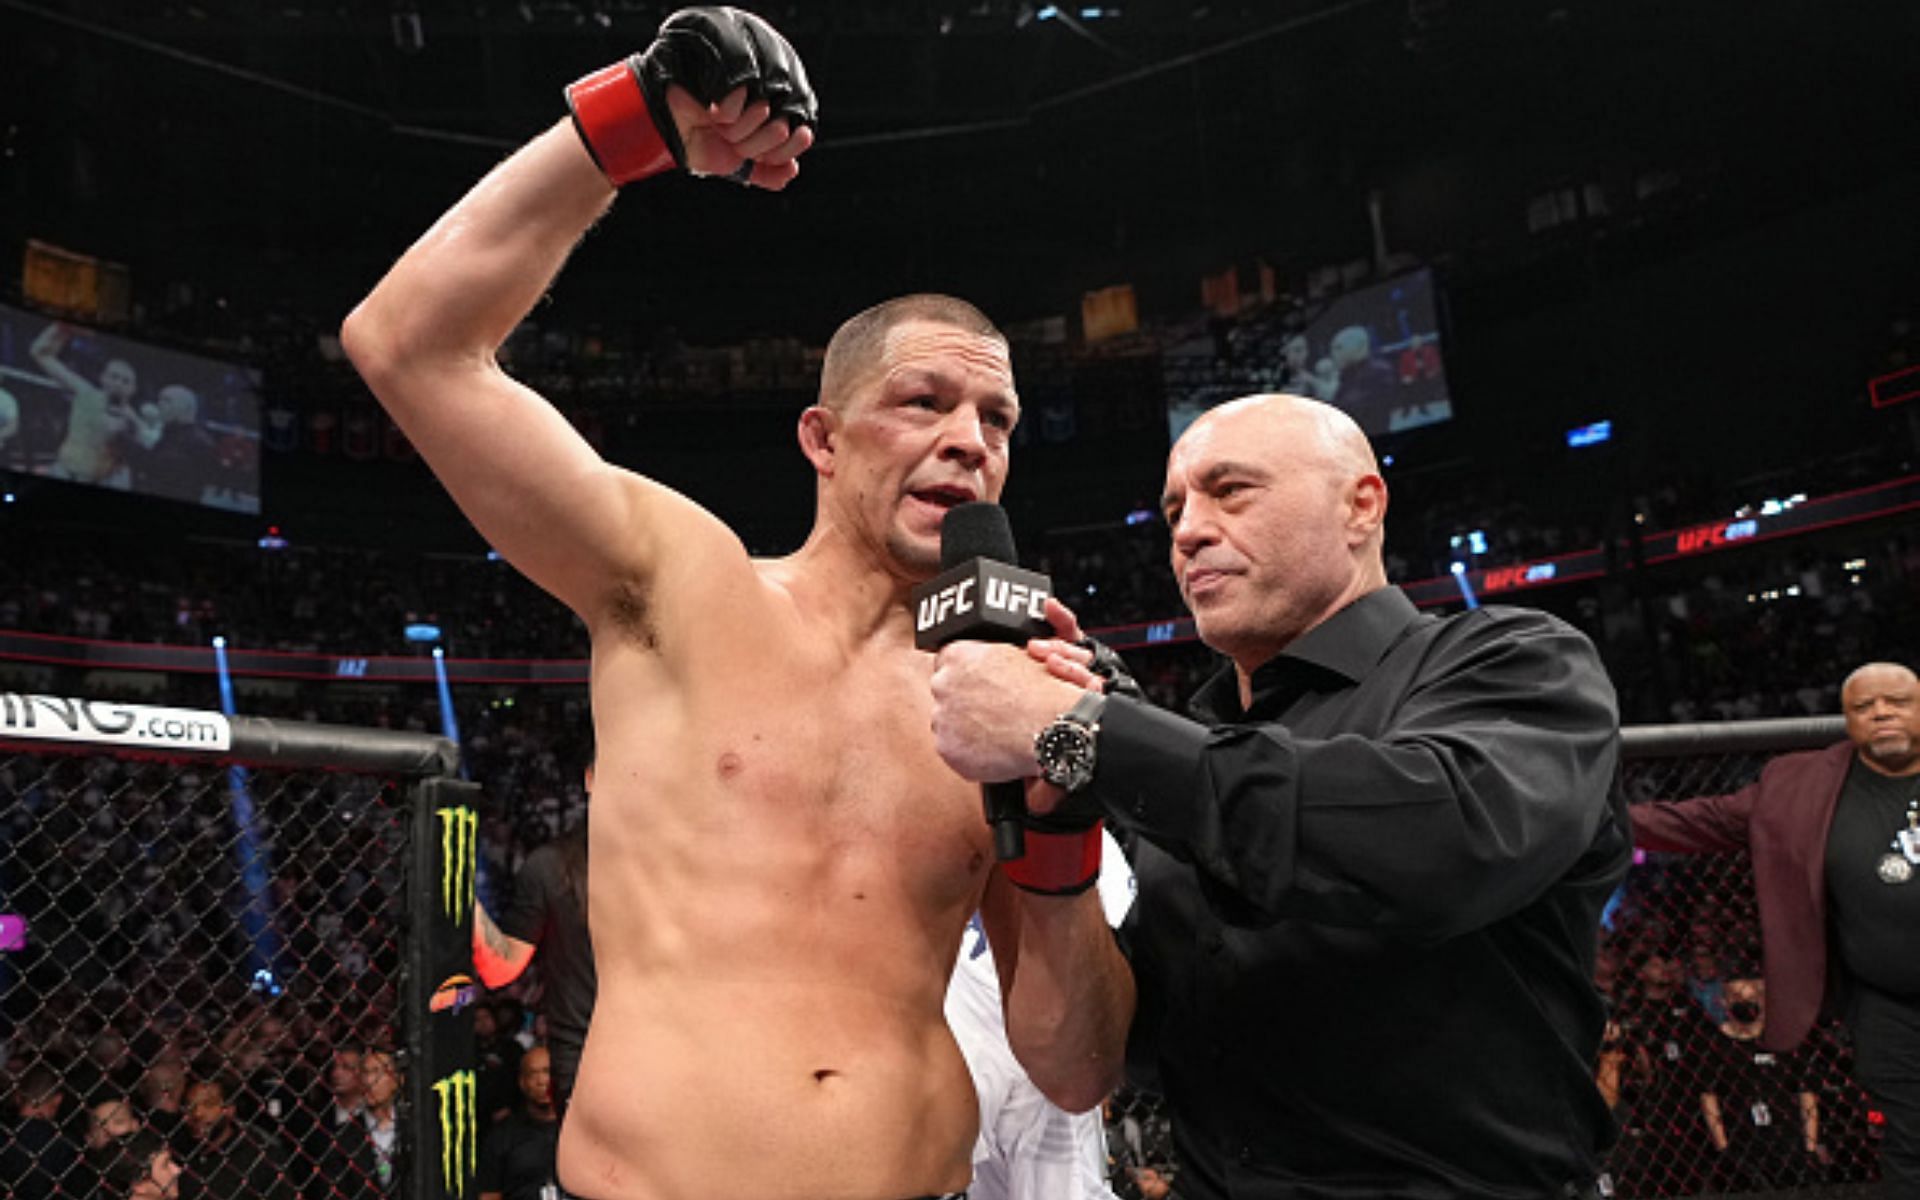 Nate Diaz at UFC 279 [Image courtesy: Getty]